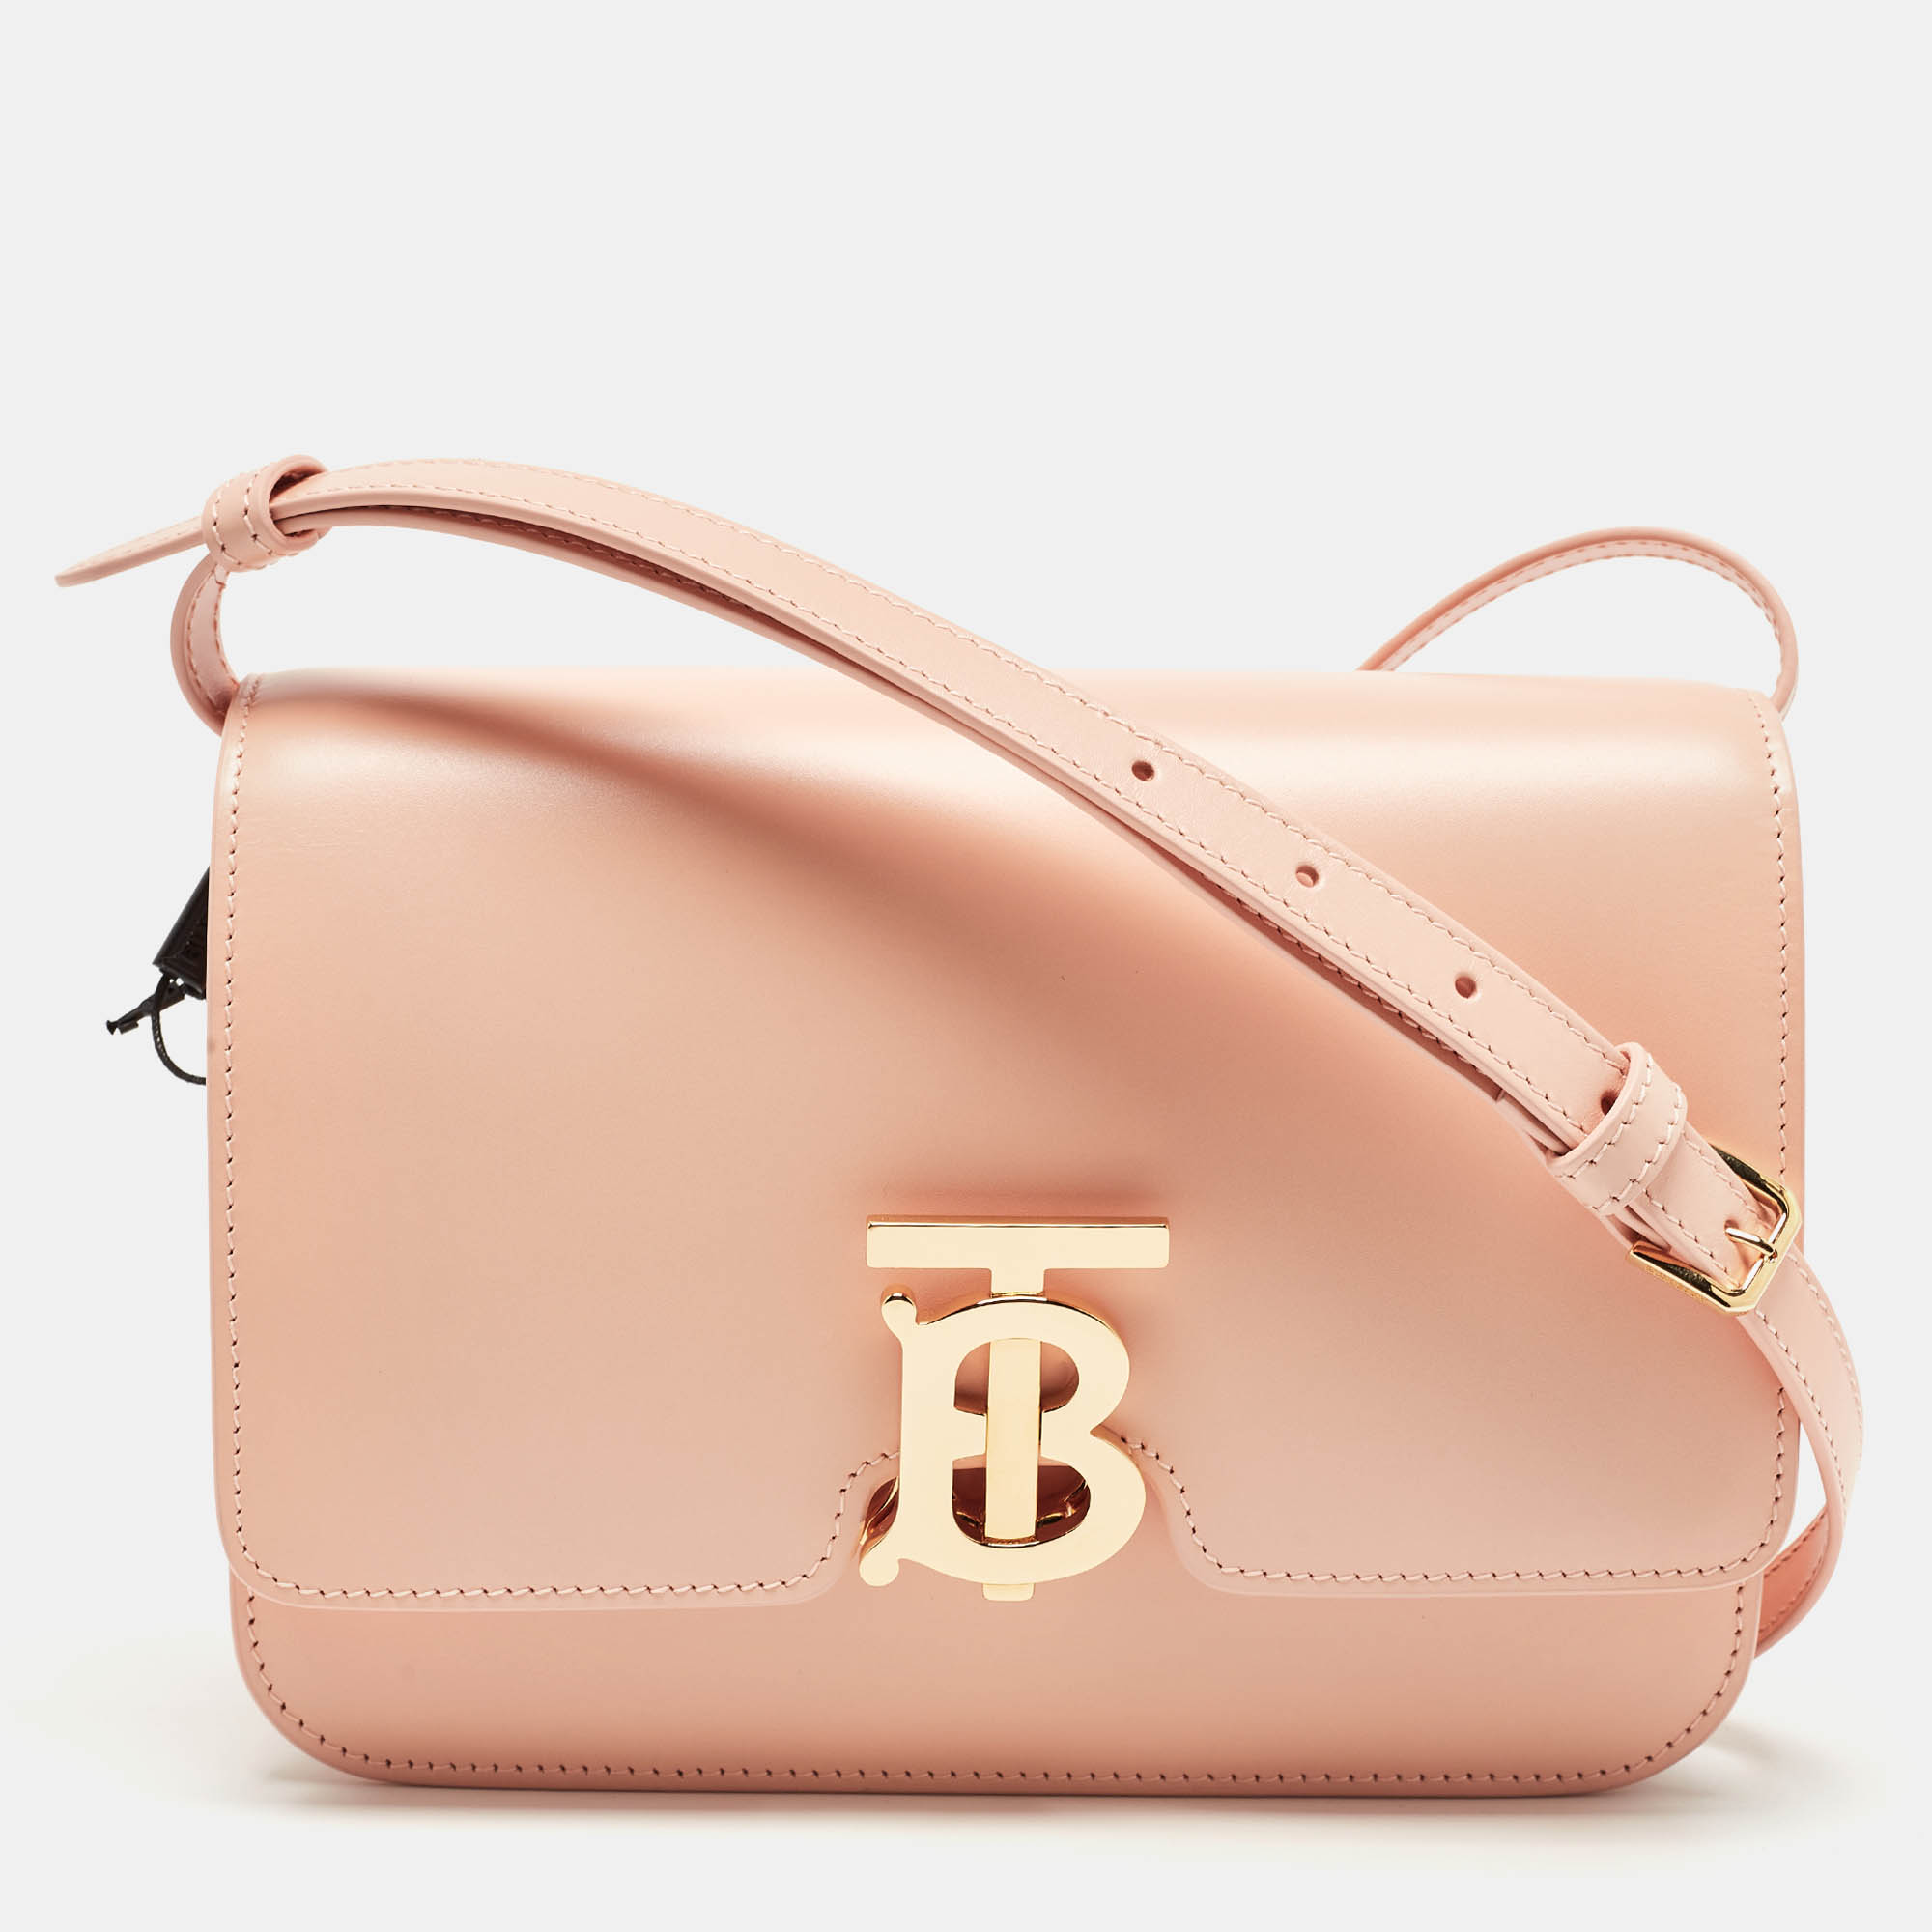 Pre-owned Burberry Peach Pink Leather Small Tb Shoulder Bag